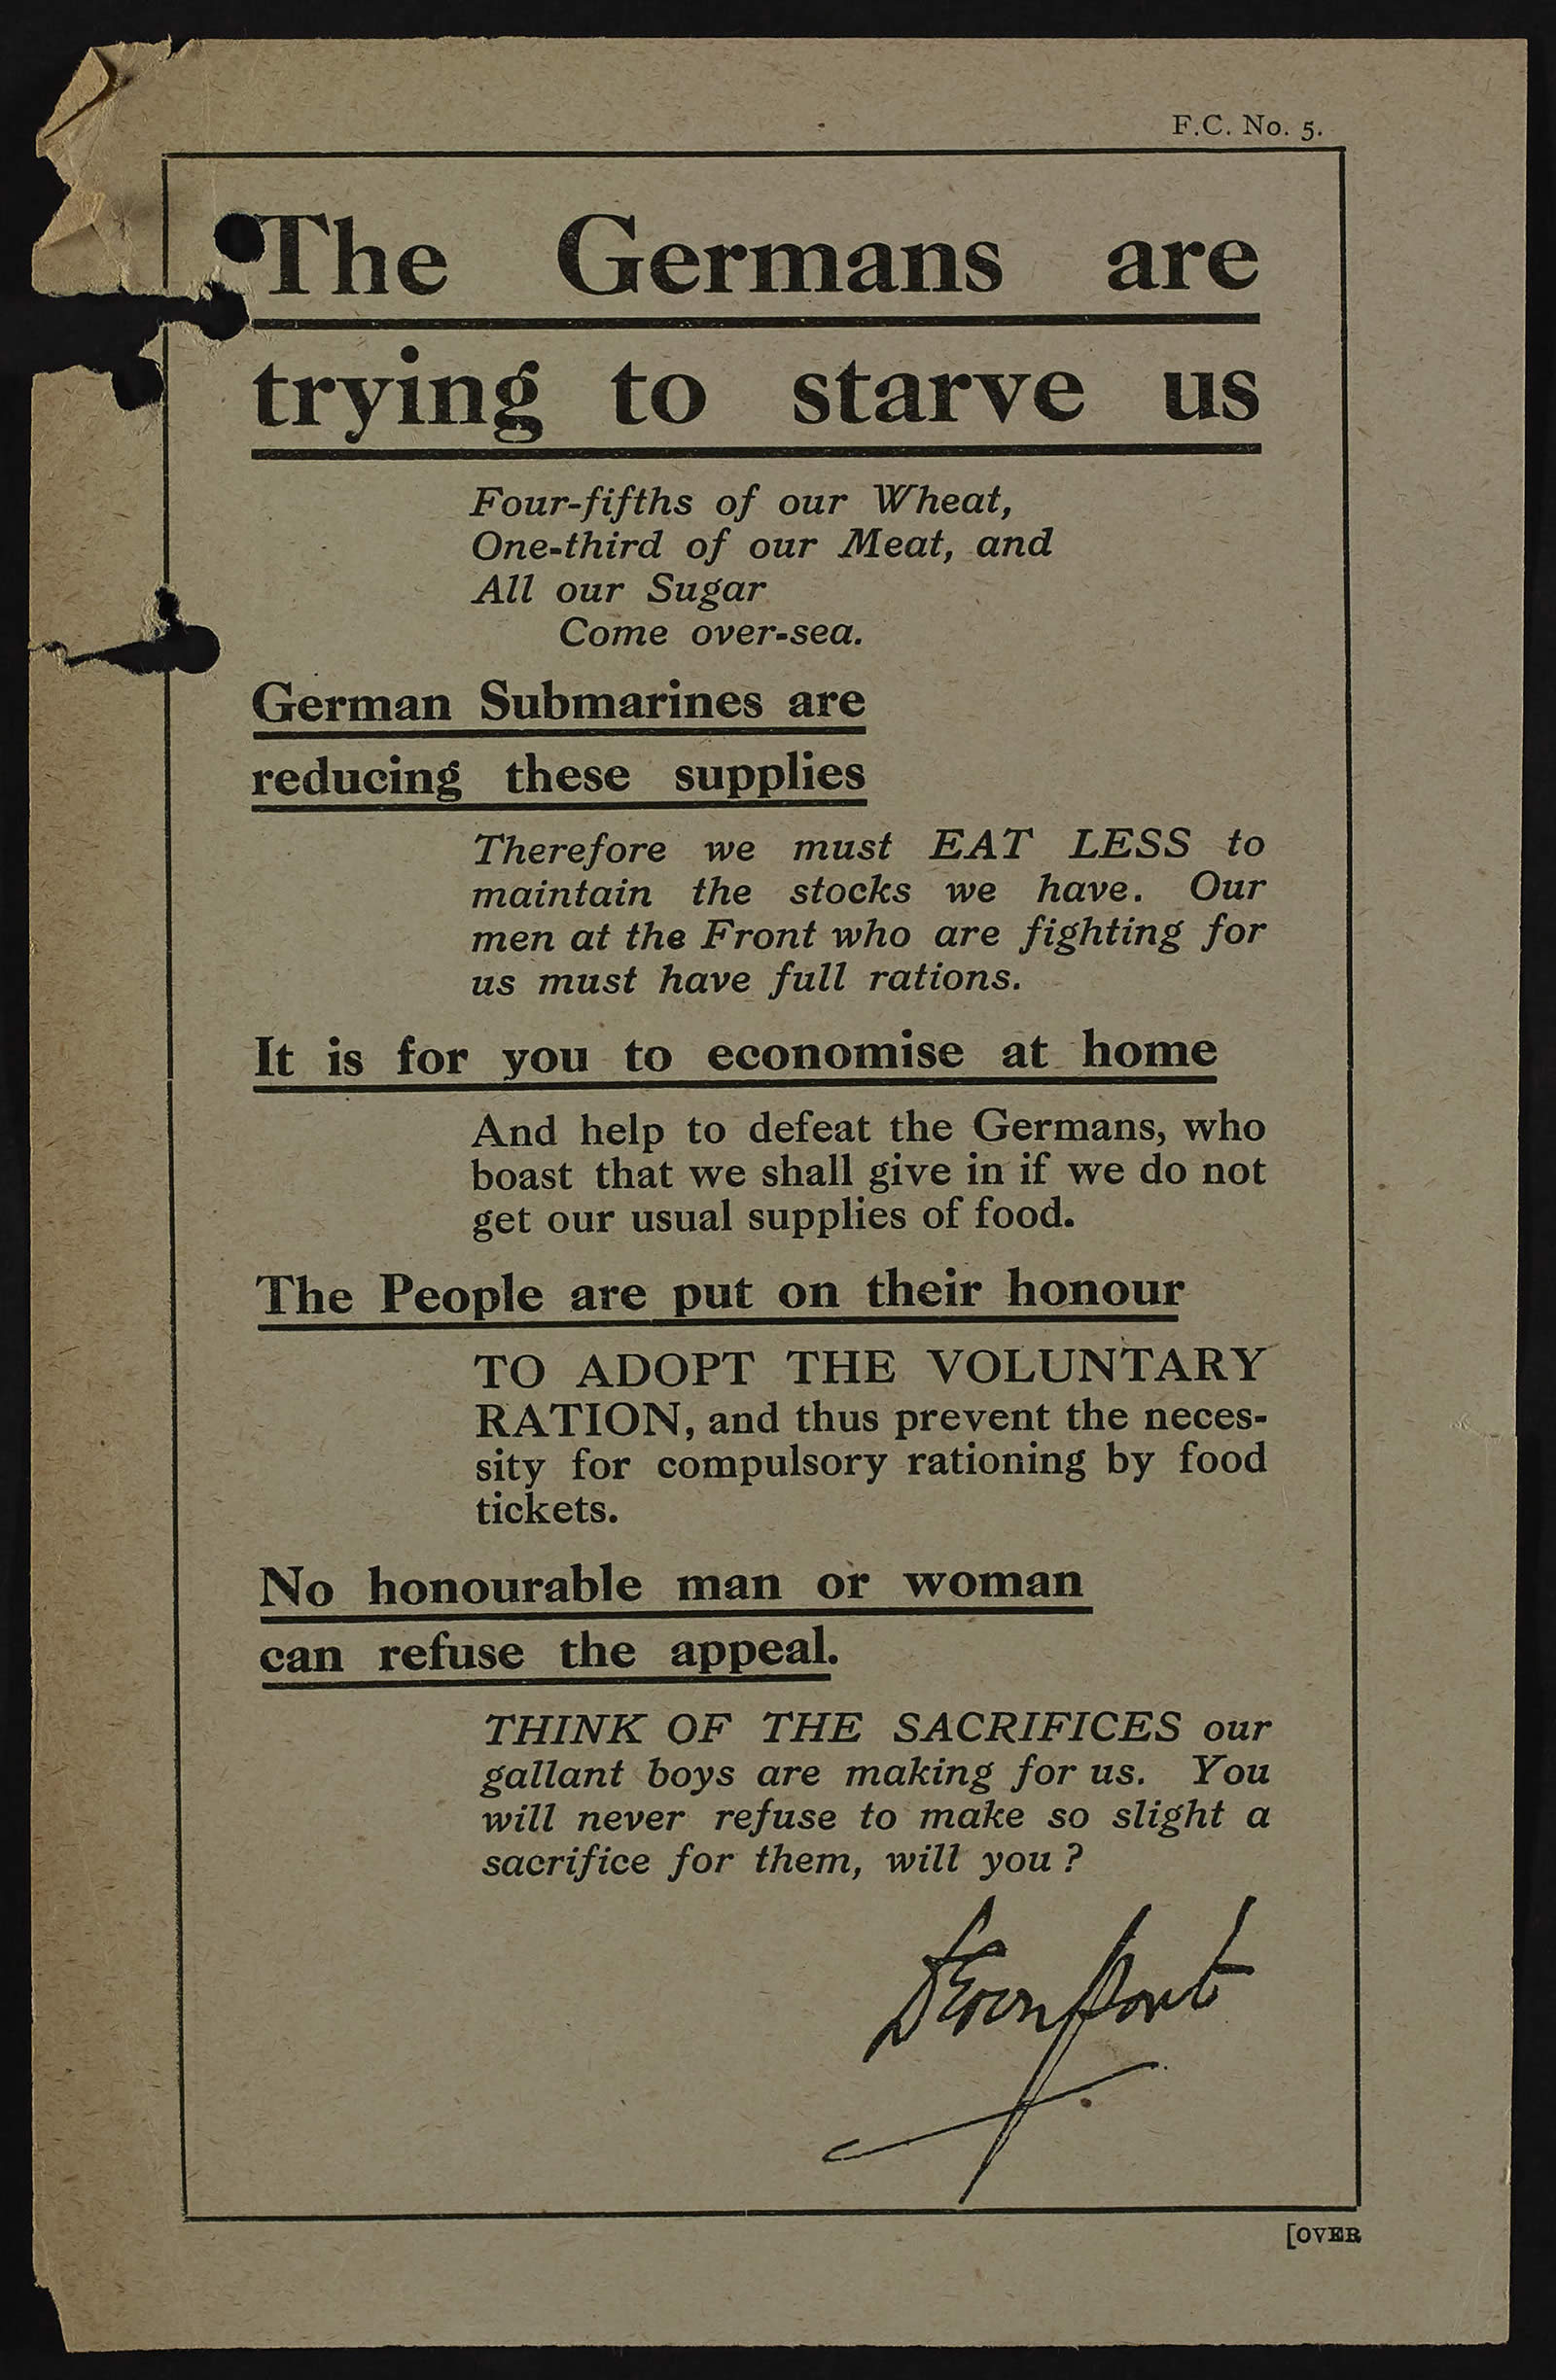 Image of a pamphlet; title reads 'The Germans are trying to starve us'